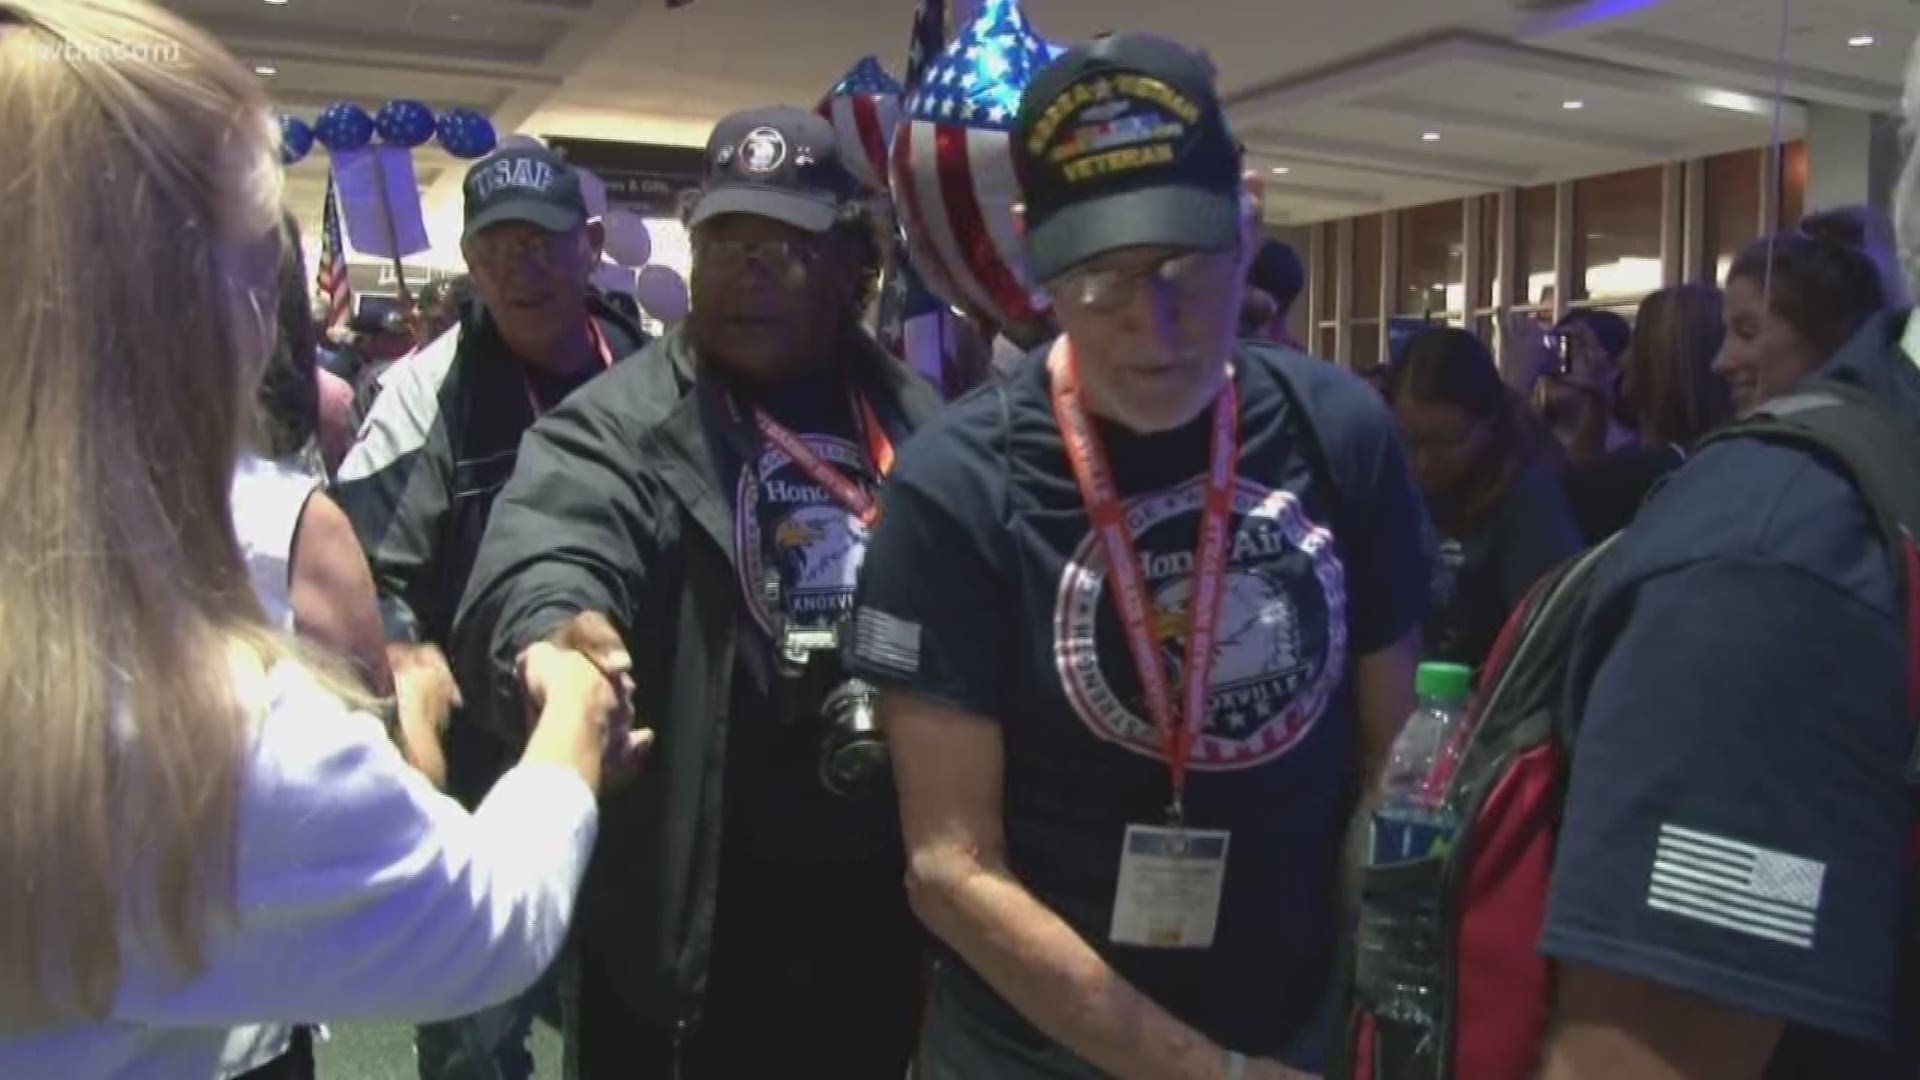 Tonight -- East Tennessee veterans are back in the Volunteer State after a special day in Washington D.C.